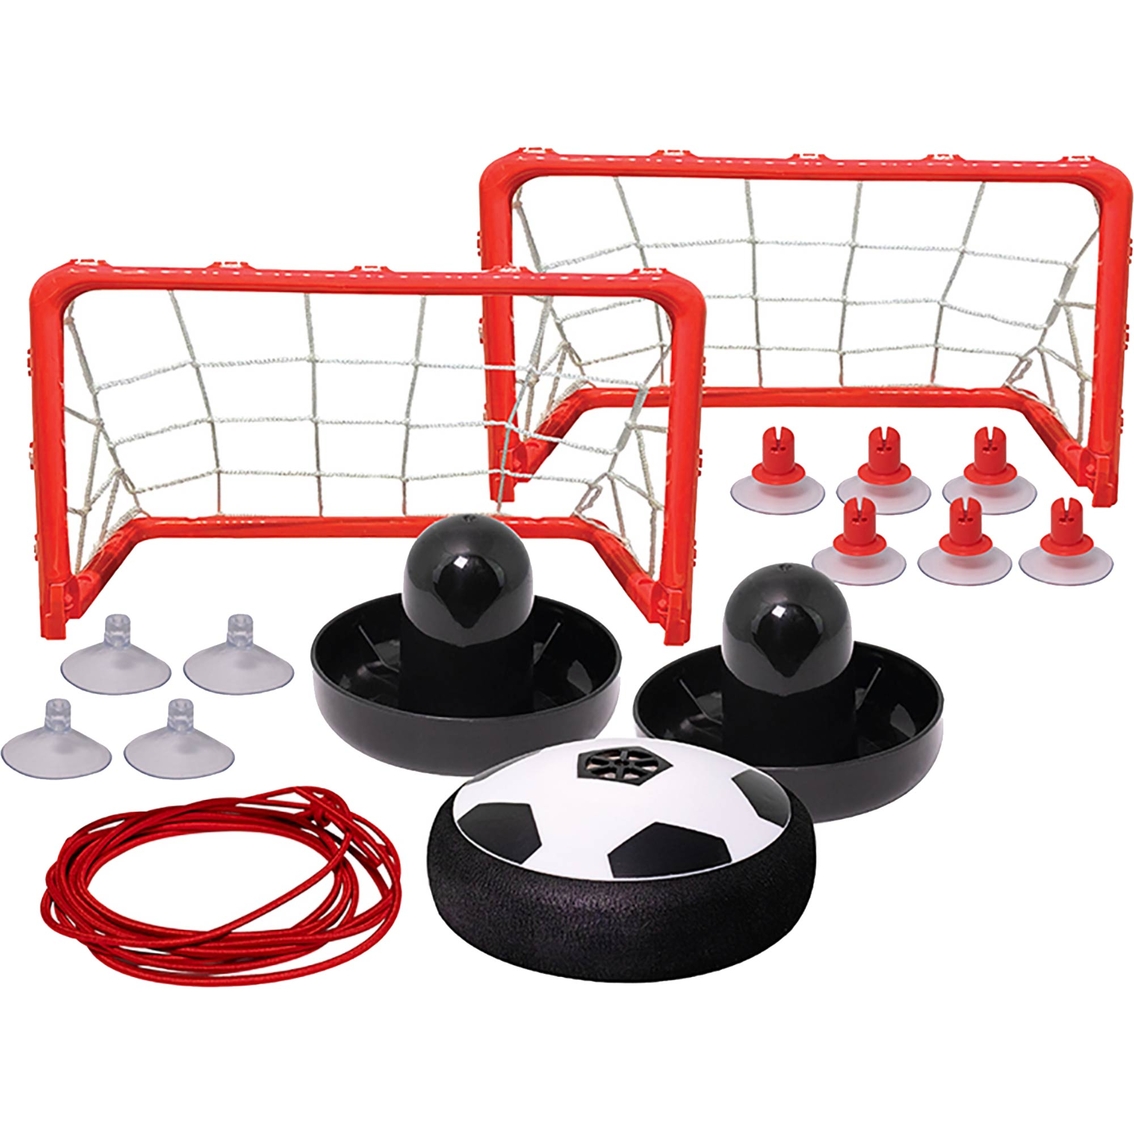 Maccabi Art Air Soccer Set with Paddles and Nets Action Game - Image 2 of 5